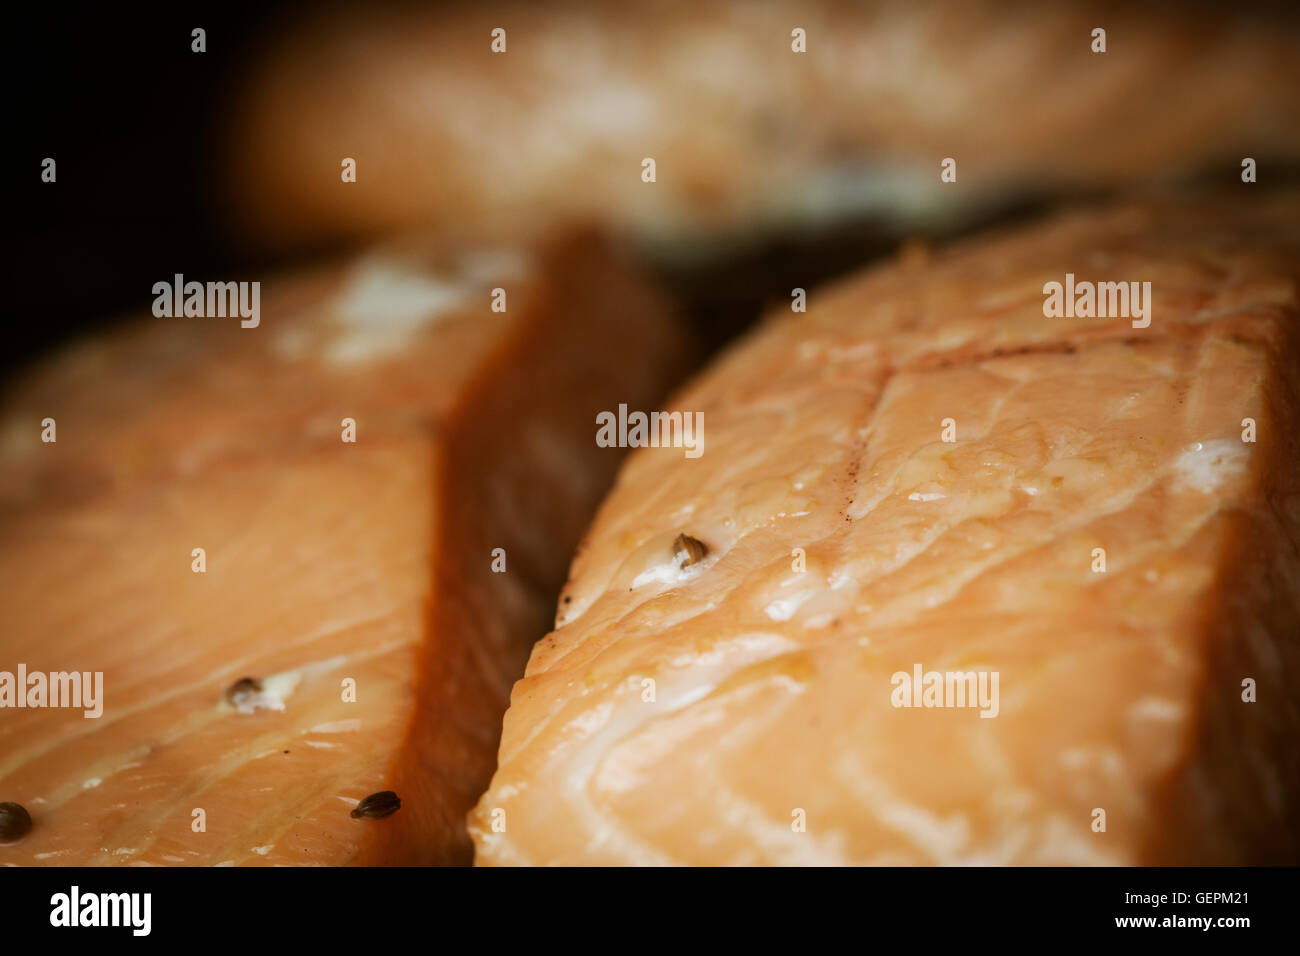 Close up of a smoked fish fillet. Stock Photo